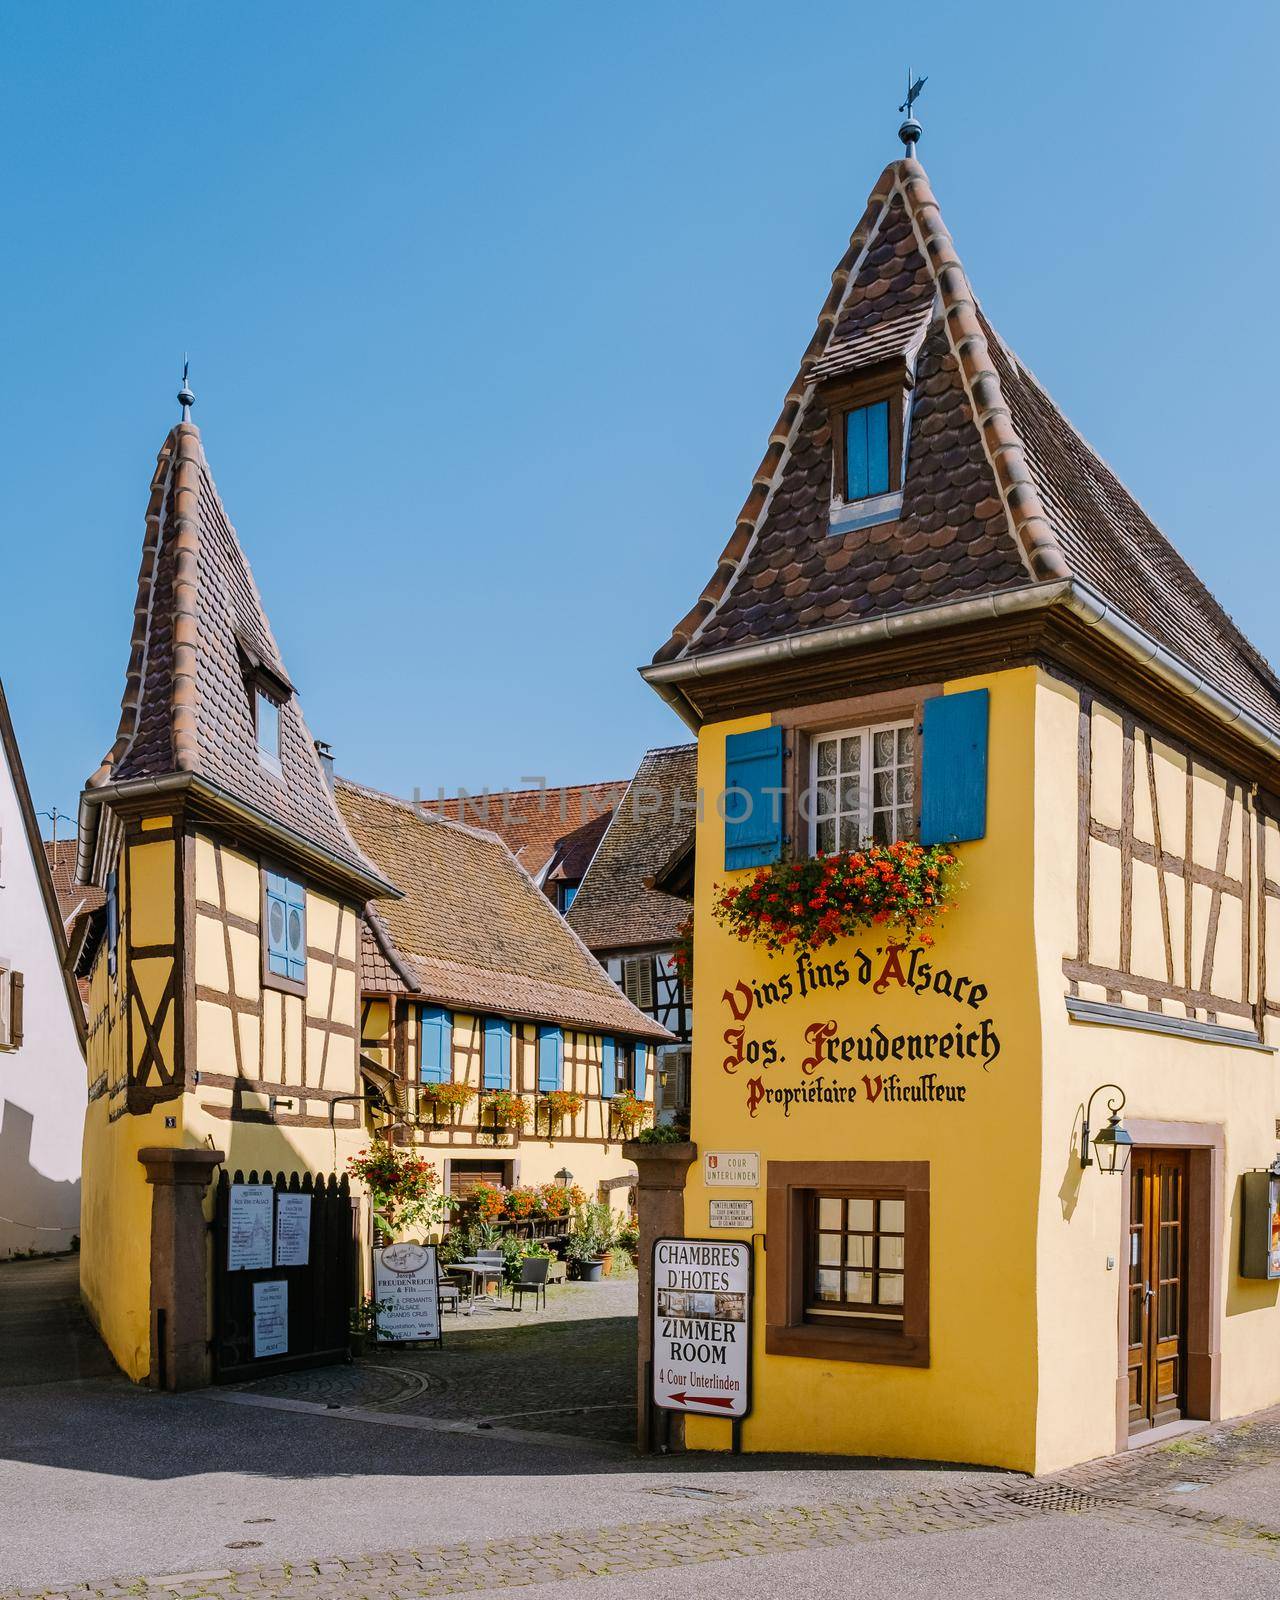 Eguisheim, Alsace, France,Traditional colorful halt-timbered houses in Eguisheim Old Town on Alsace Wine Route, France by fokkebok